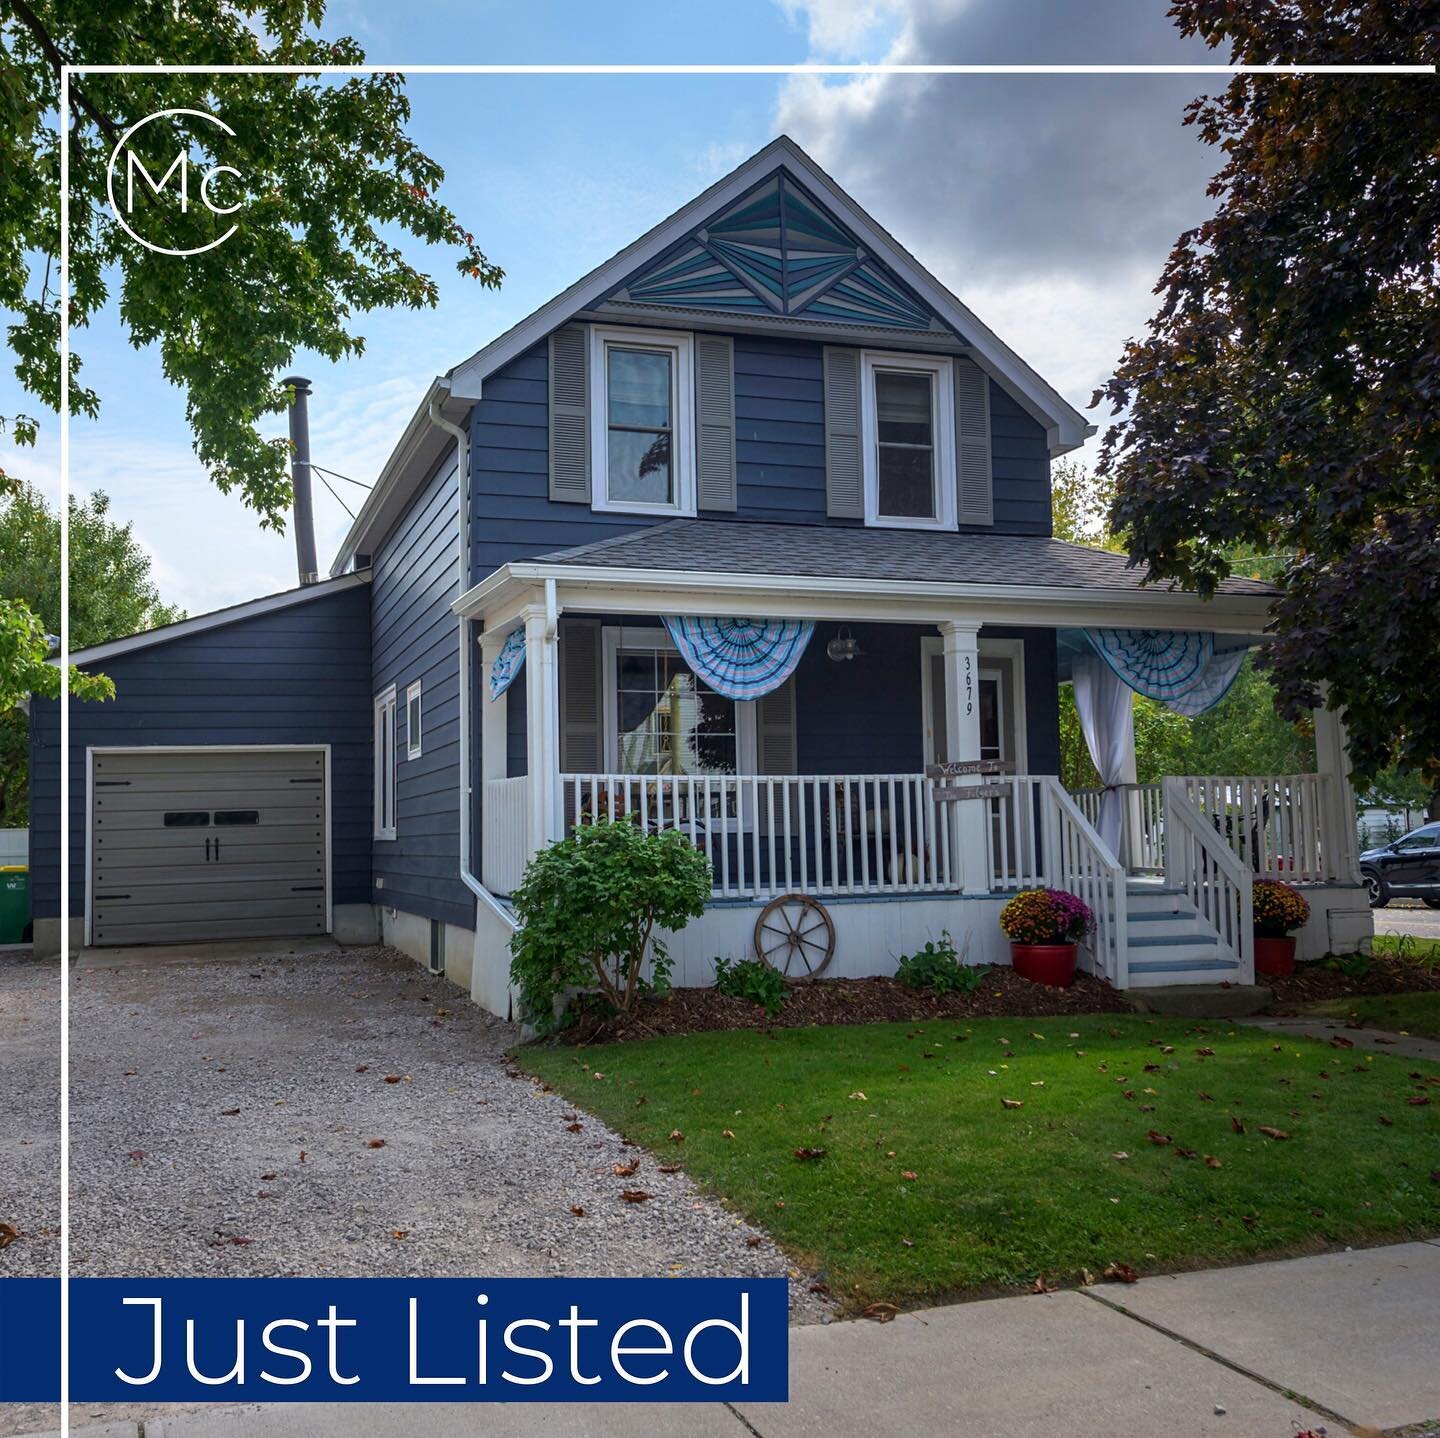 Just Listed: Beautifully updated home in the quaint town of Glencoe.

With loads of updates and plenty of space, this 4 bed, 2 bath home is waiting for the right family to make it their next home. Boasting a wrap around front porch, a spacious backya